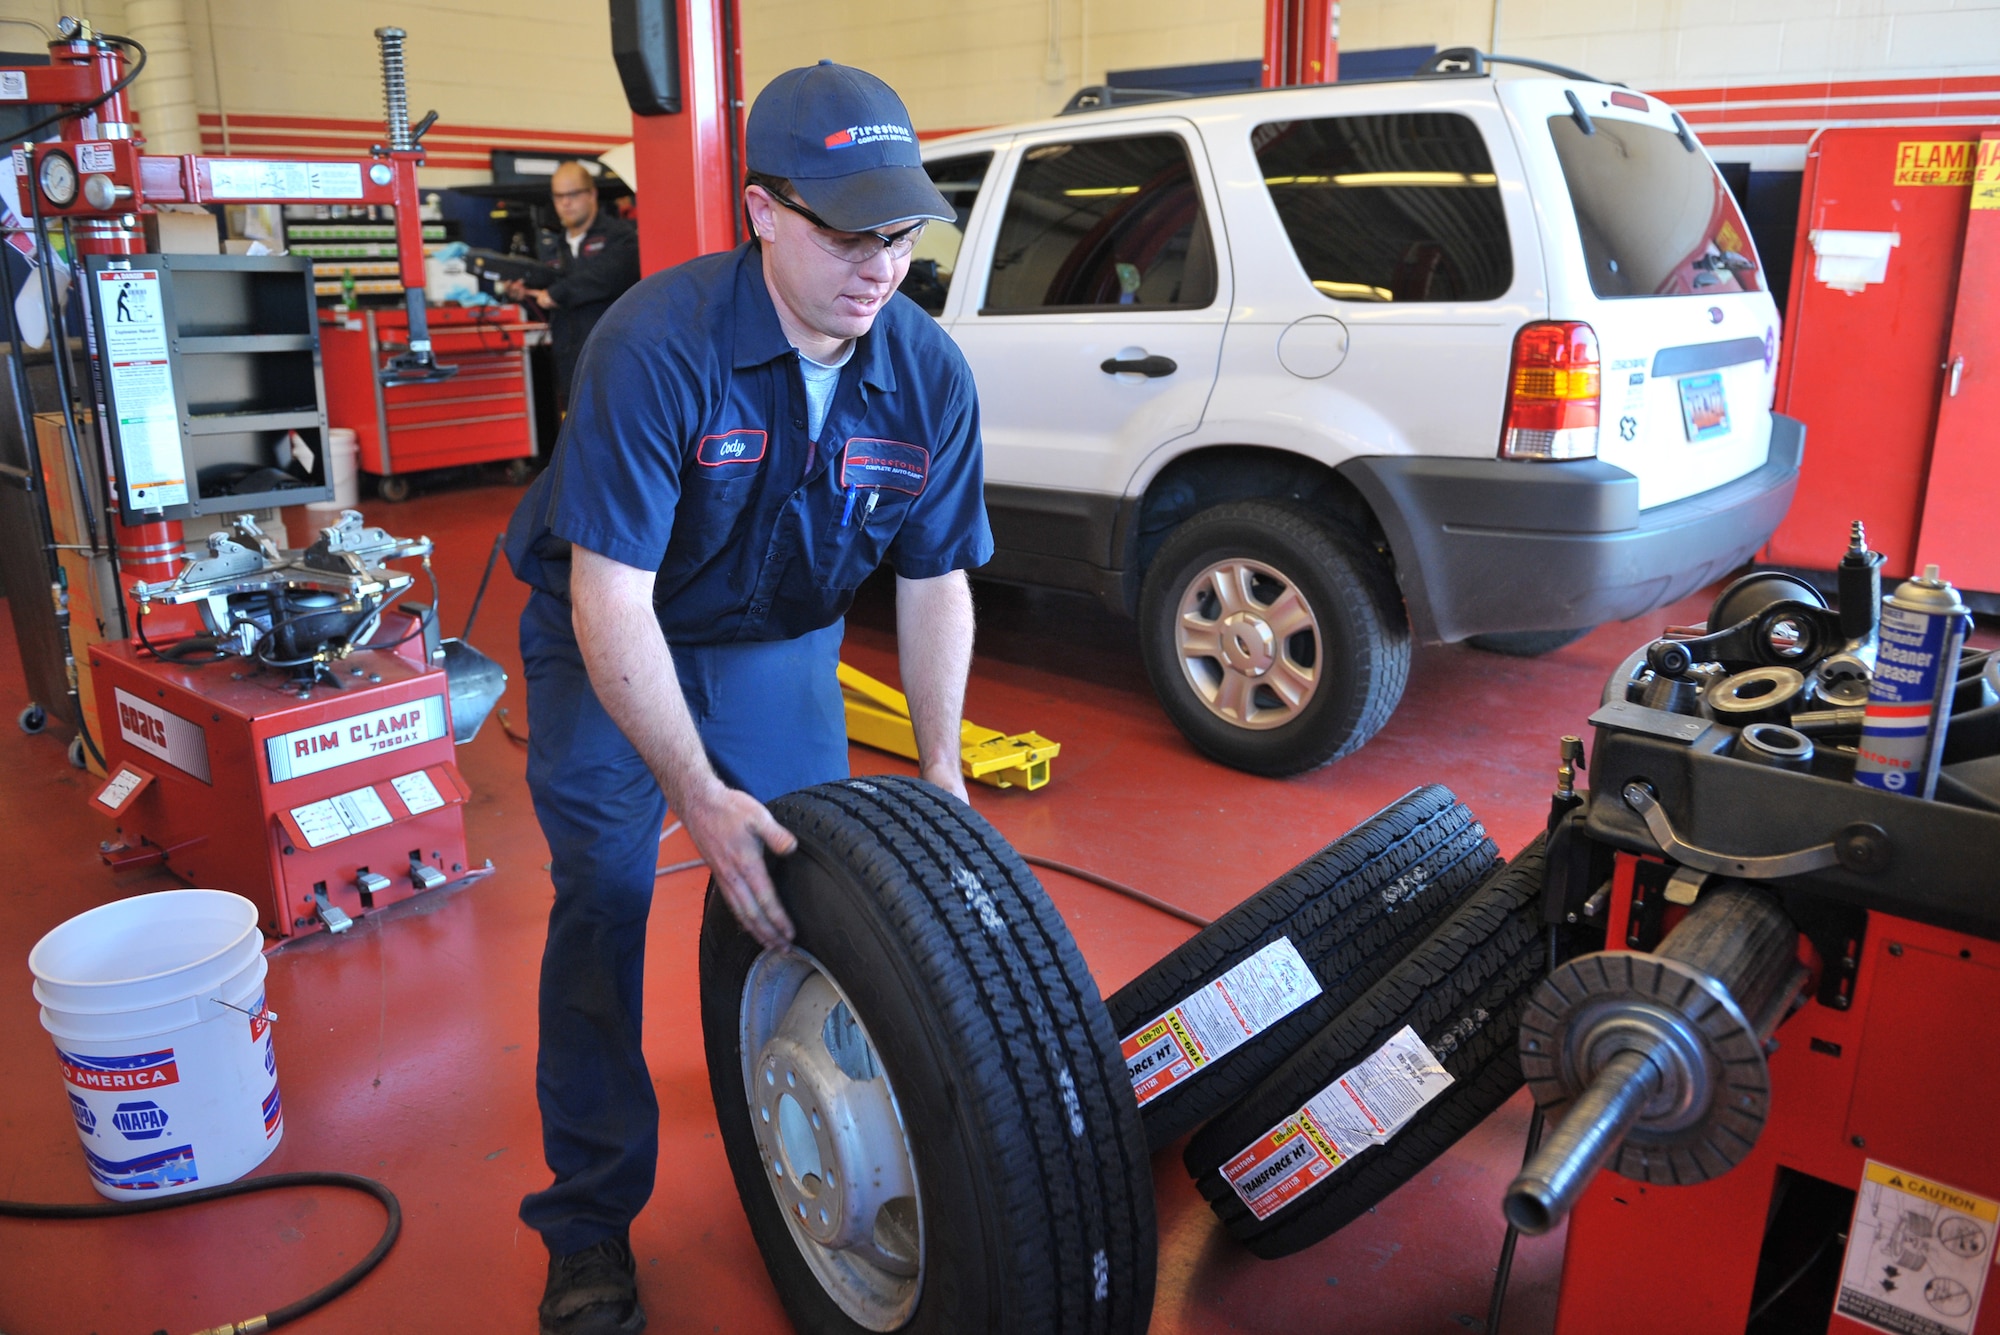 SHAW AIR FORCE BASE, S.C. -- Cody Steffen lines up new Firestone tires, Oct. 21. Firestone Car Care Centers are opening at 30 Army and Air Force Exchange Service locations across the United States. (U.S. Air Force photo/Senior Airman Kathrine McDowell) 